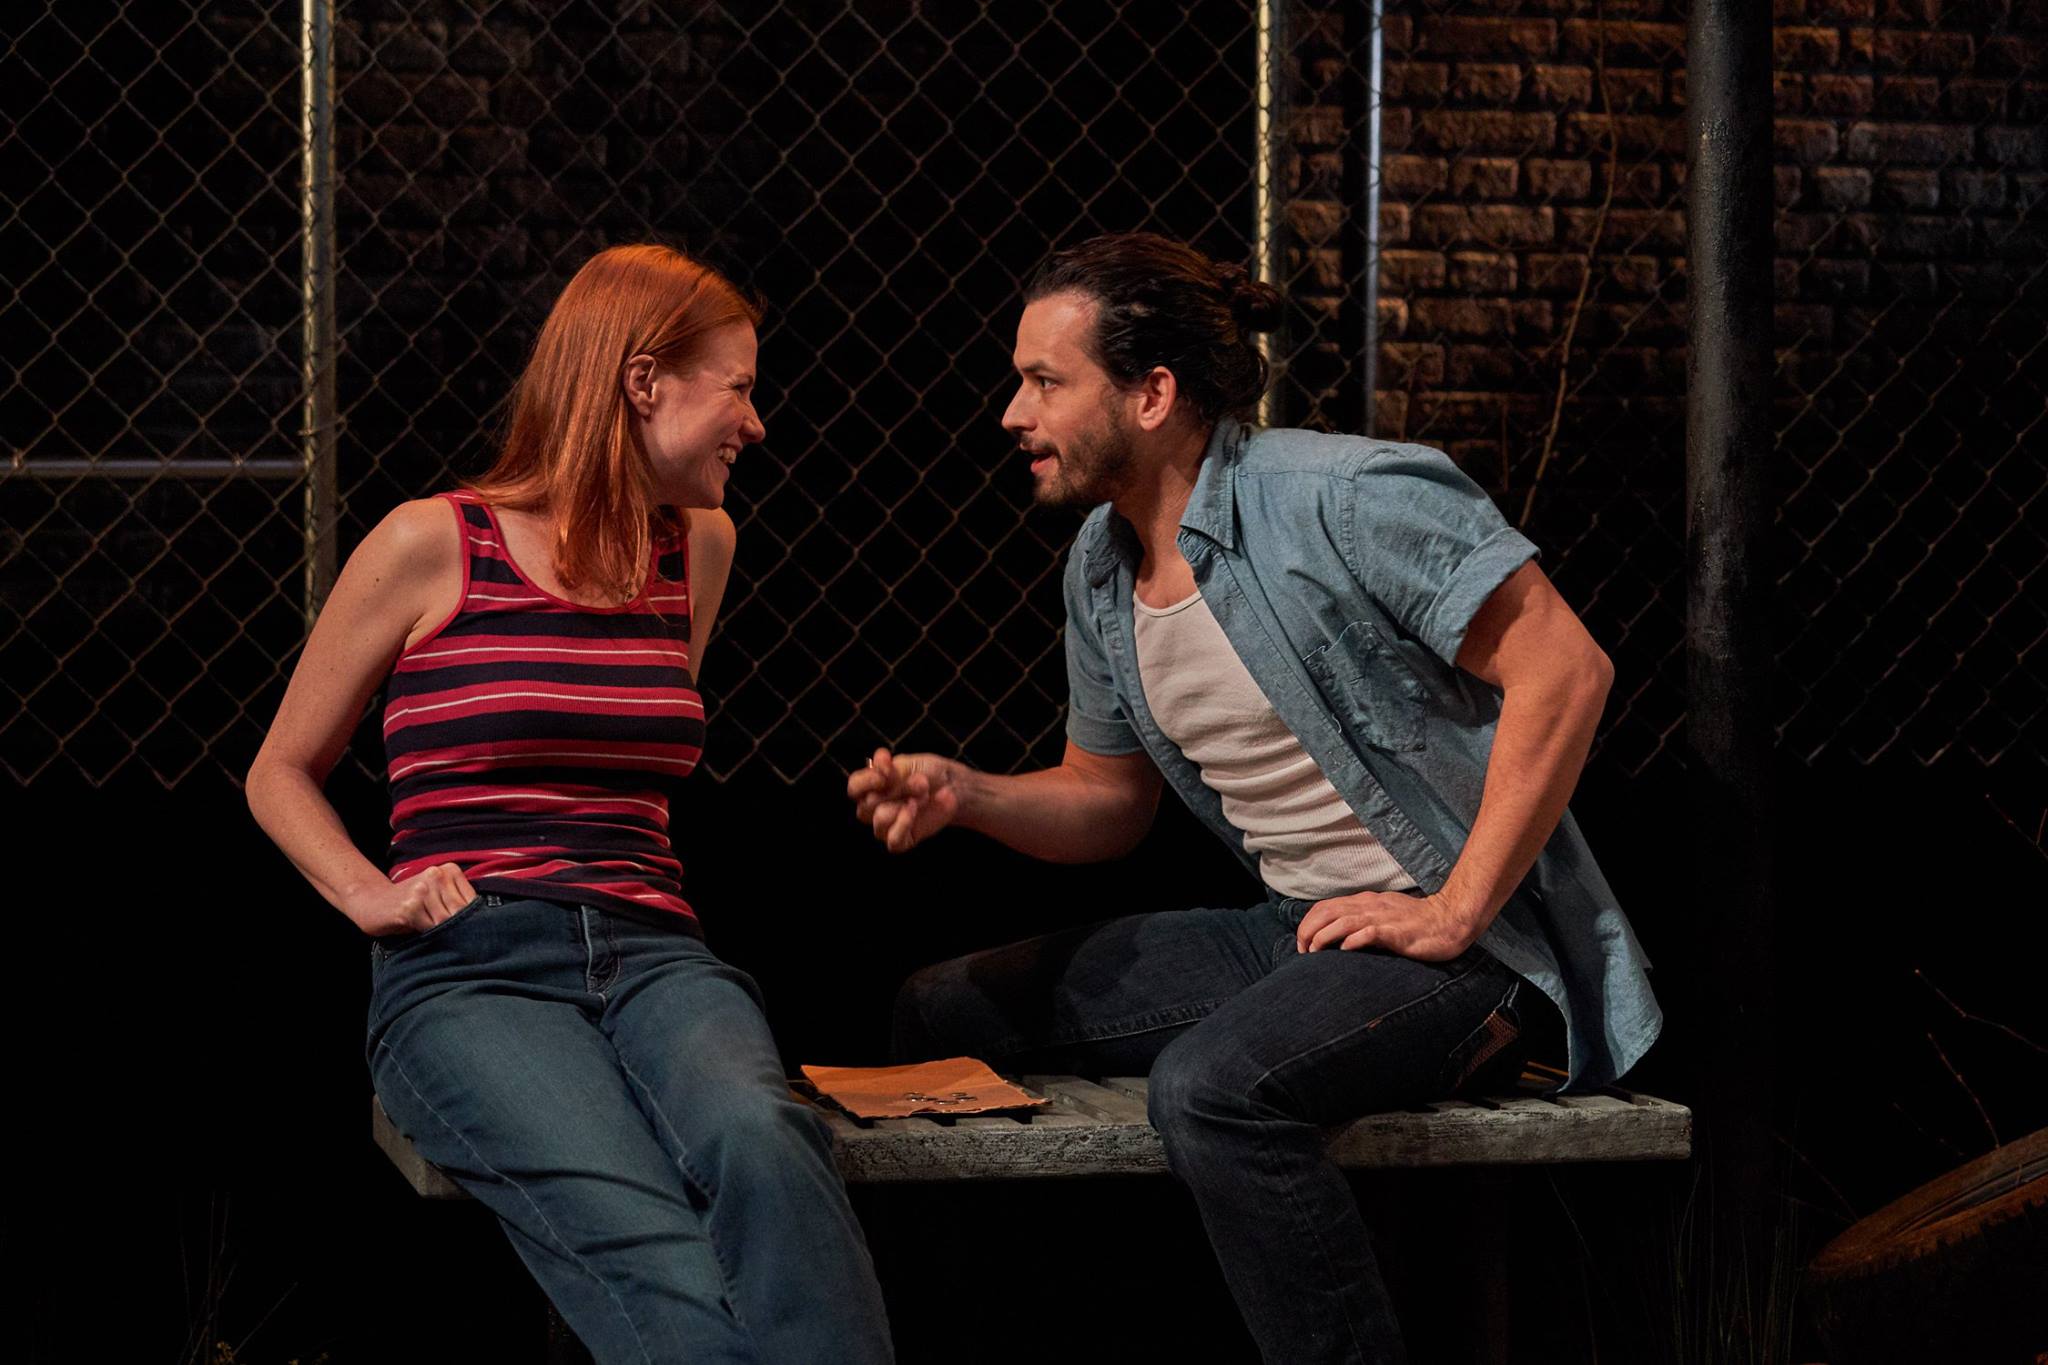  Kate MacCluggage and Marcin Pawlikiewicz in  Ironbound  at the Kitchen Theatre Company. Photo: Dave Burbank 